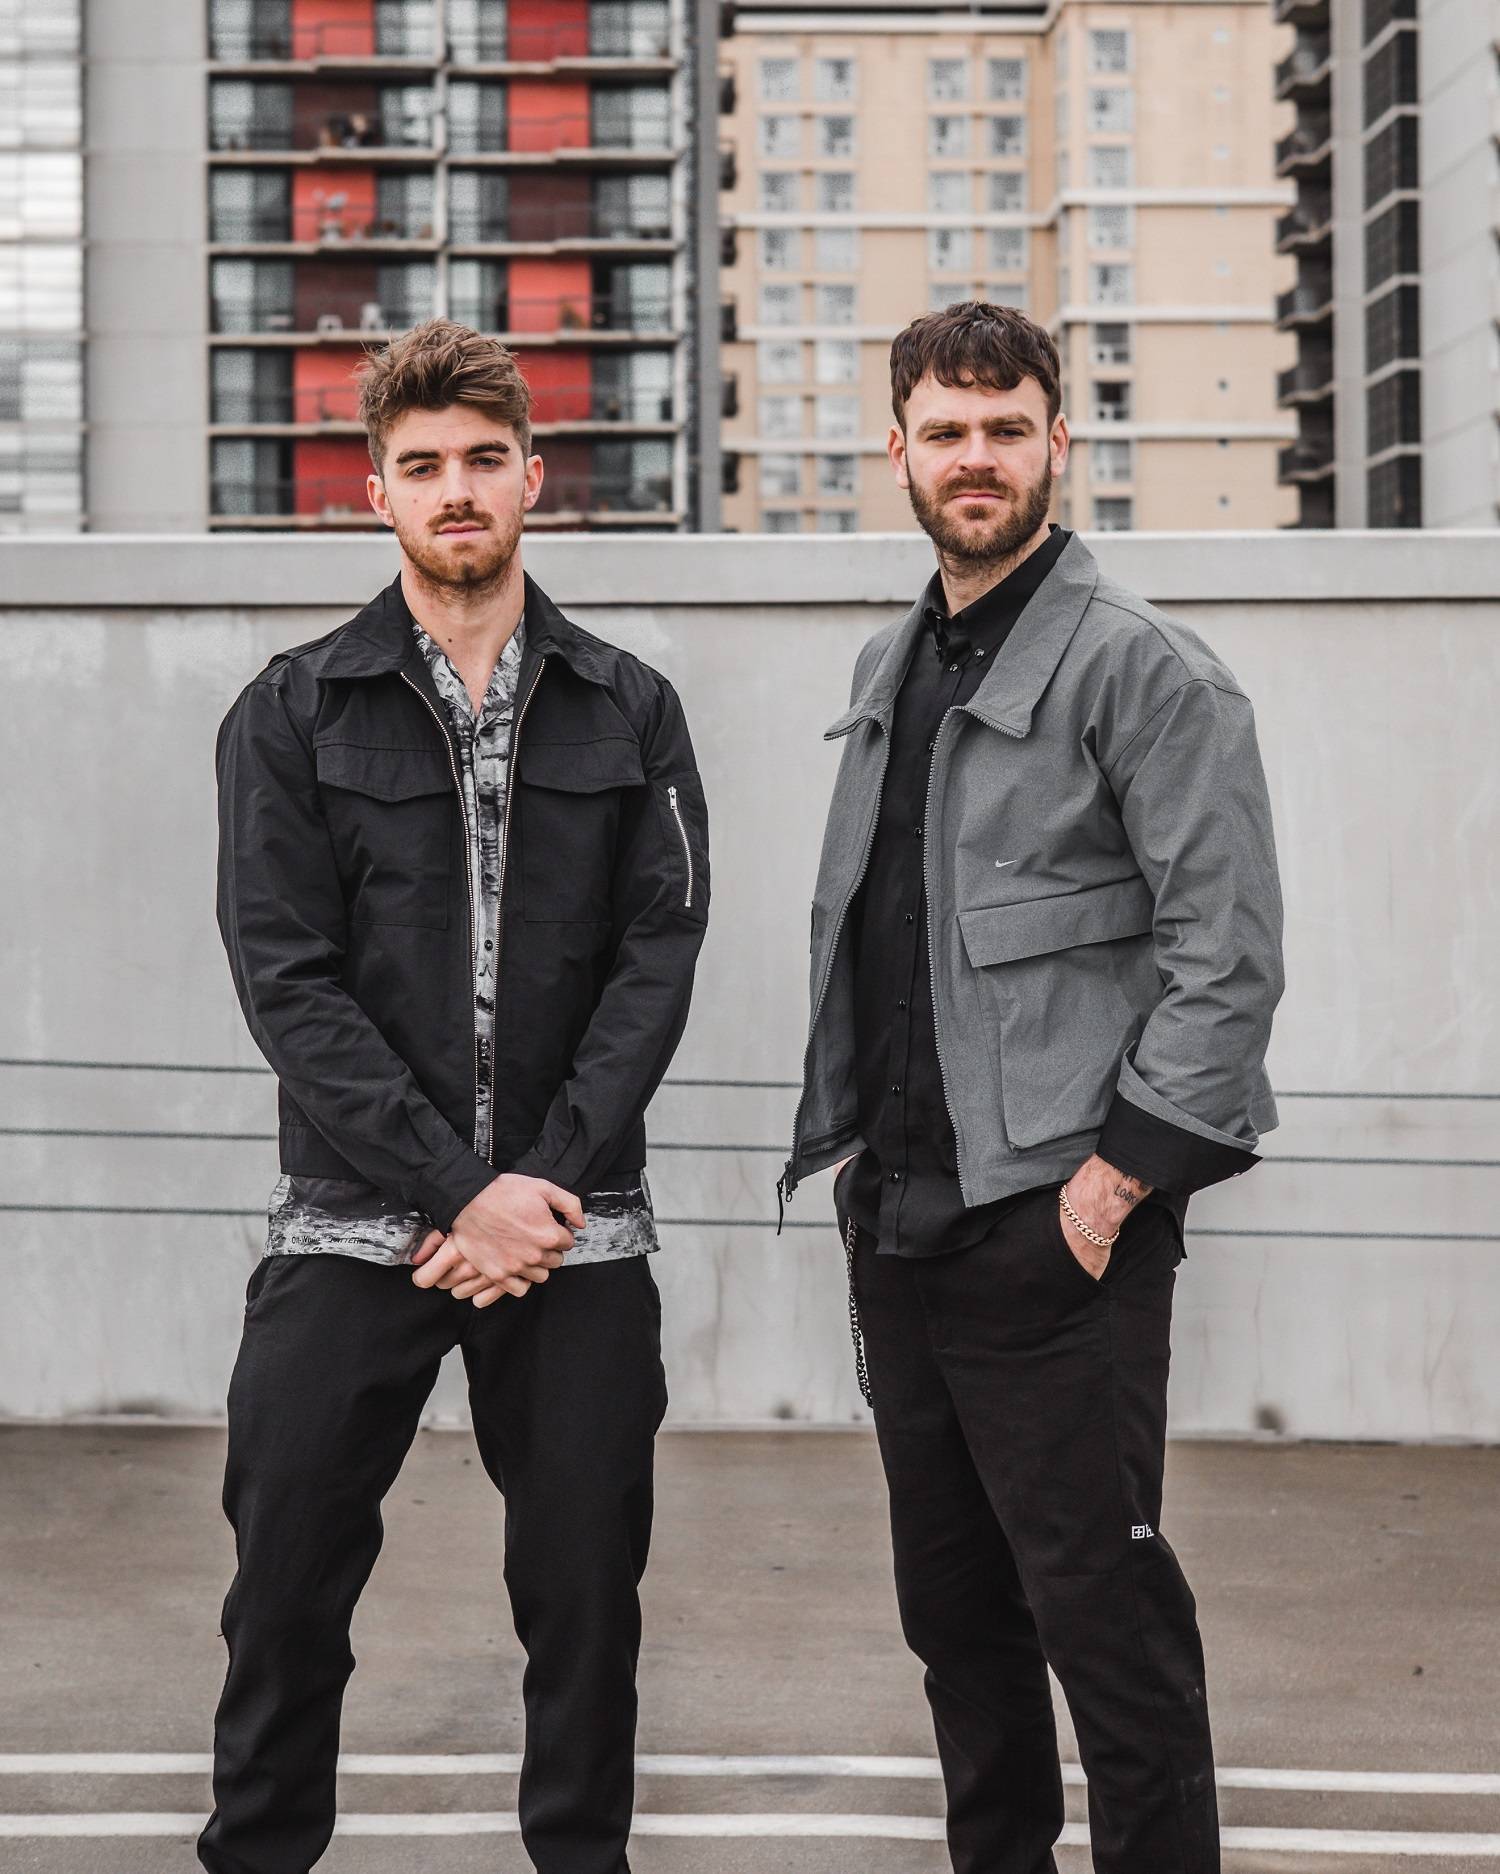 Buy The Chainsmokers: 2019 Live in Shanghai Music Tickets in Singapore